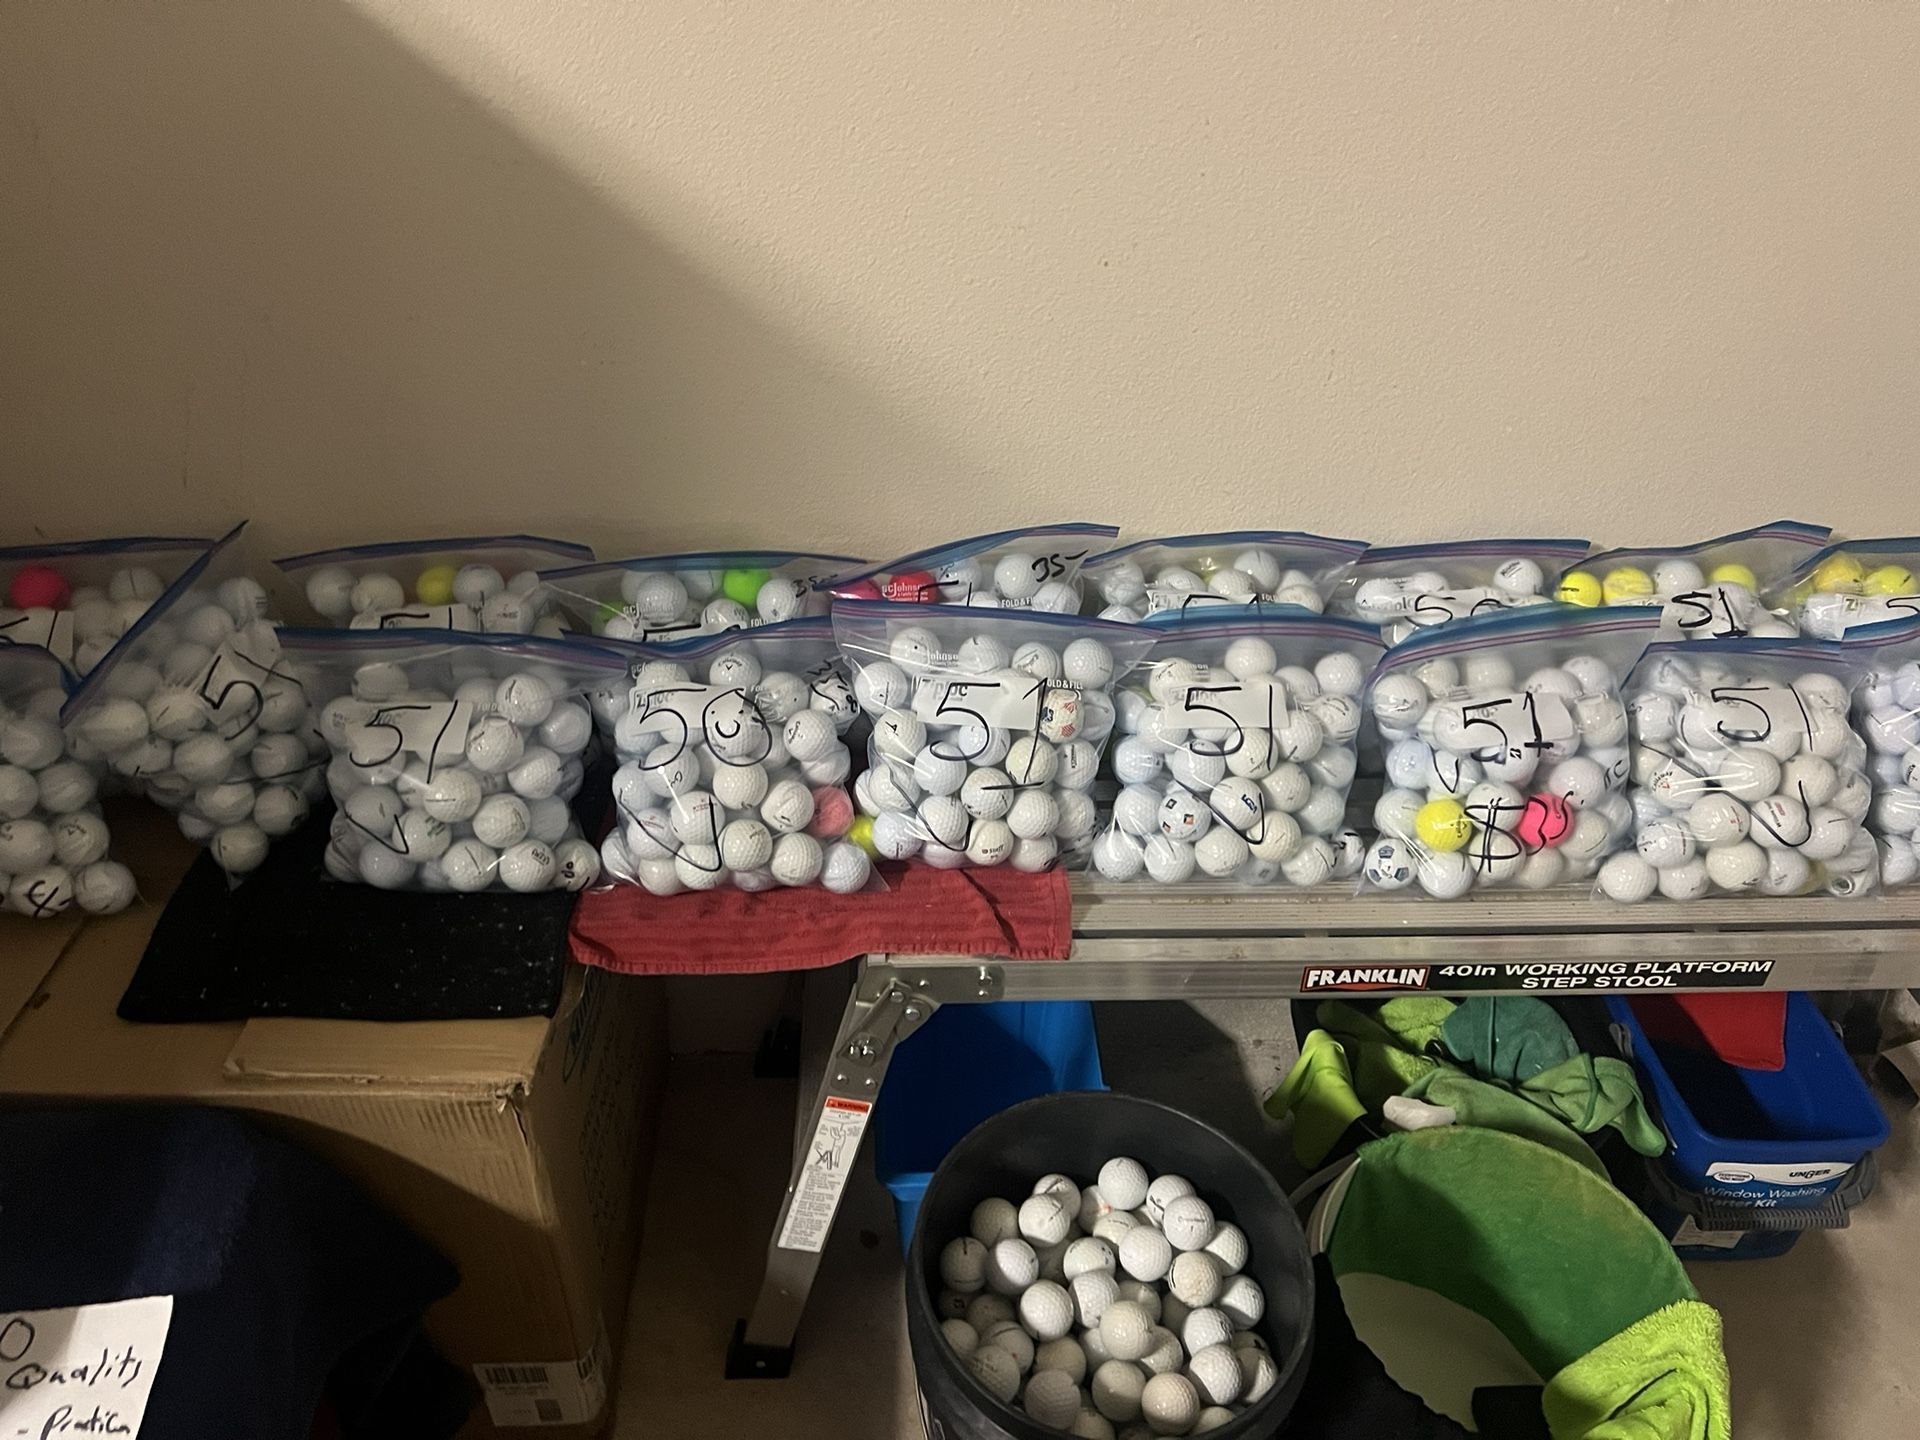 80 Quality Used Name Brand Golf Balls- Cleaned And Sanitized Ready For That Weekend Round 